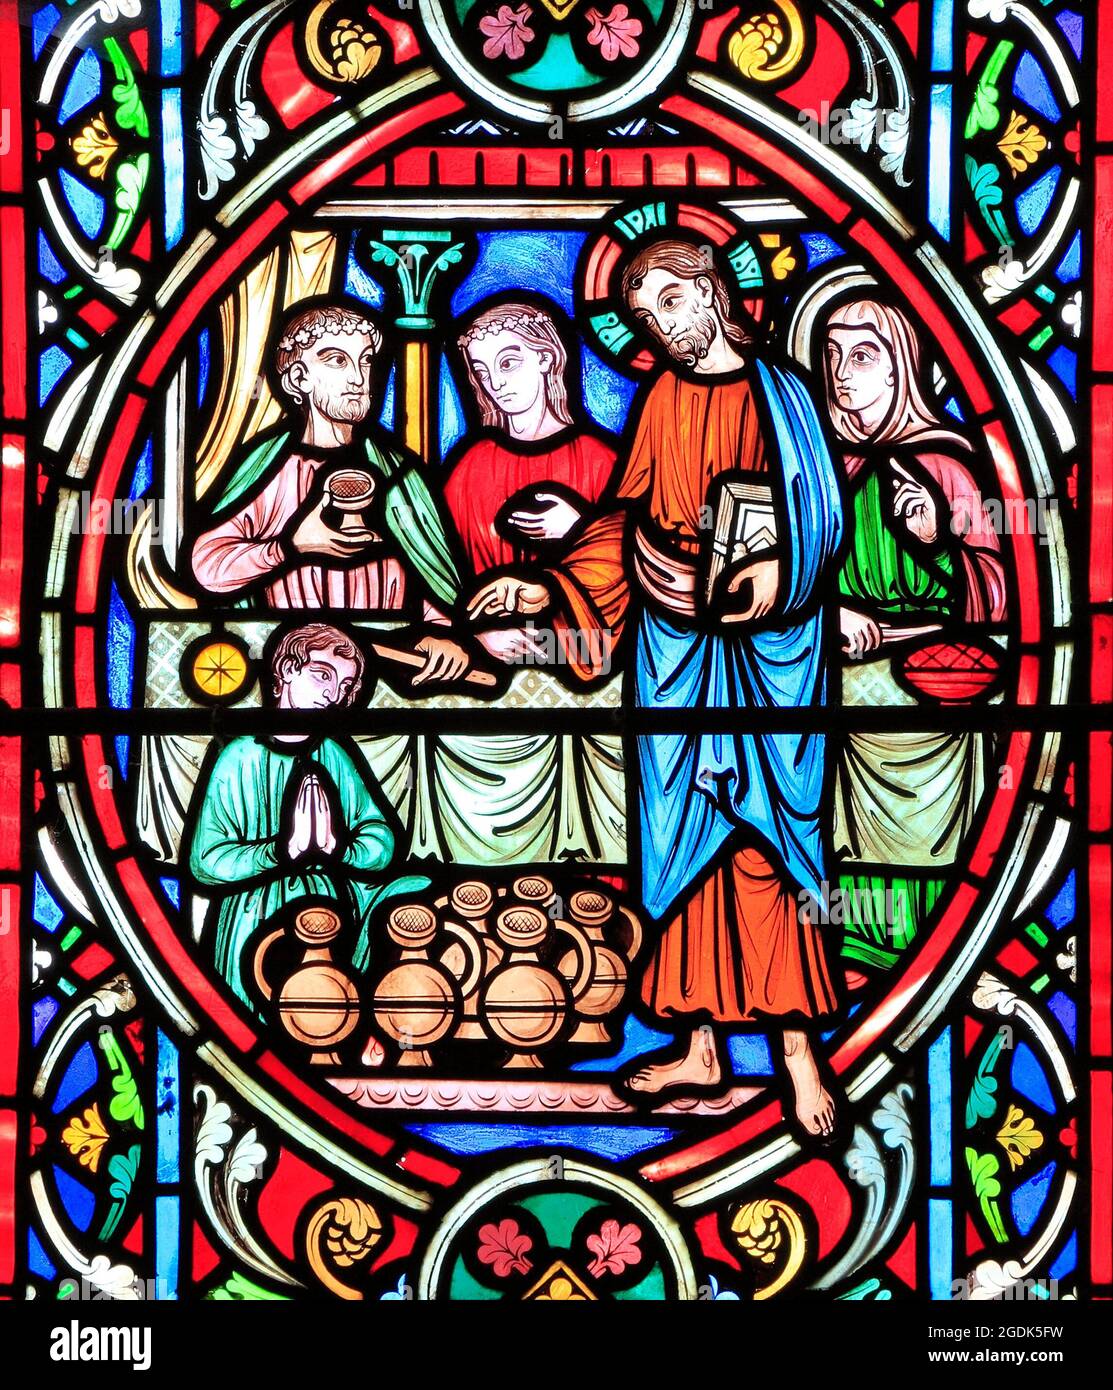 Scene from Life of Jesus, by Adolph Didron, Paris, 1860, stained glass window, Feltwell, Norfolk, Jesus at Cana Wedding Feast, turns water into wine. Stock Photo